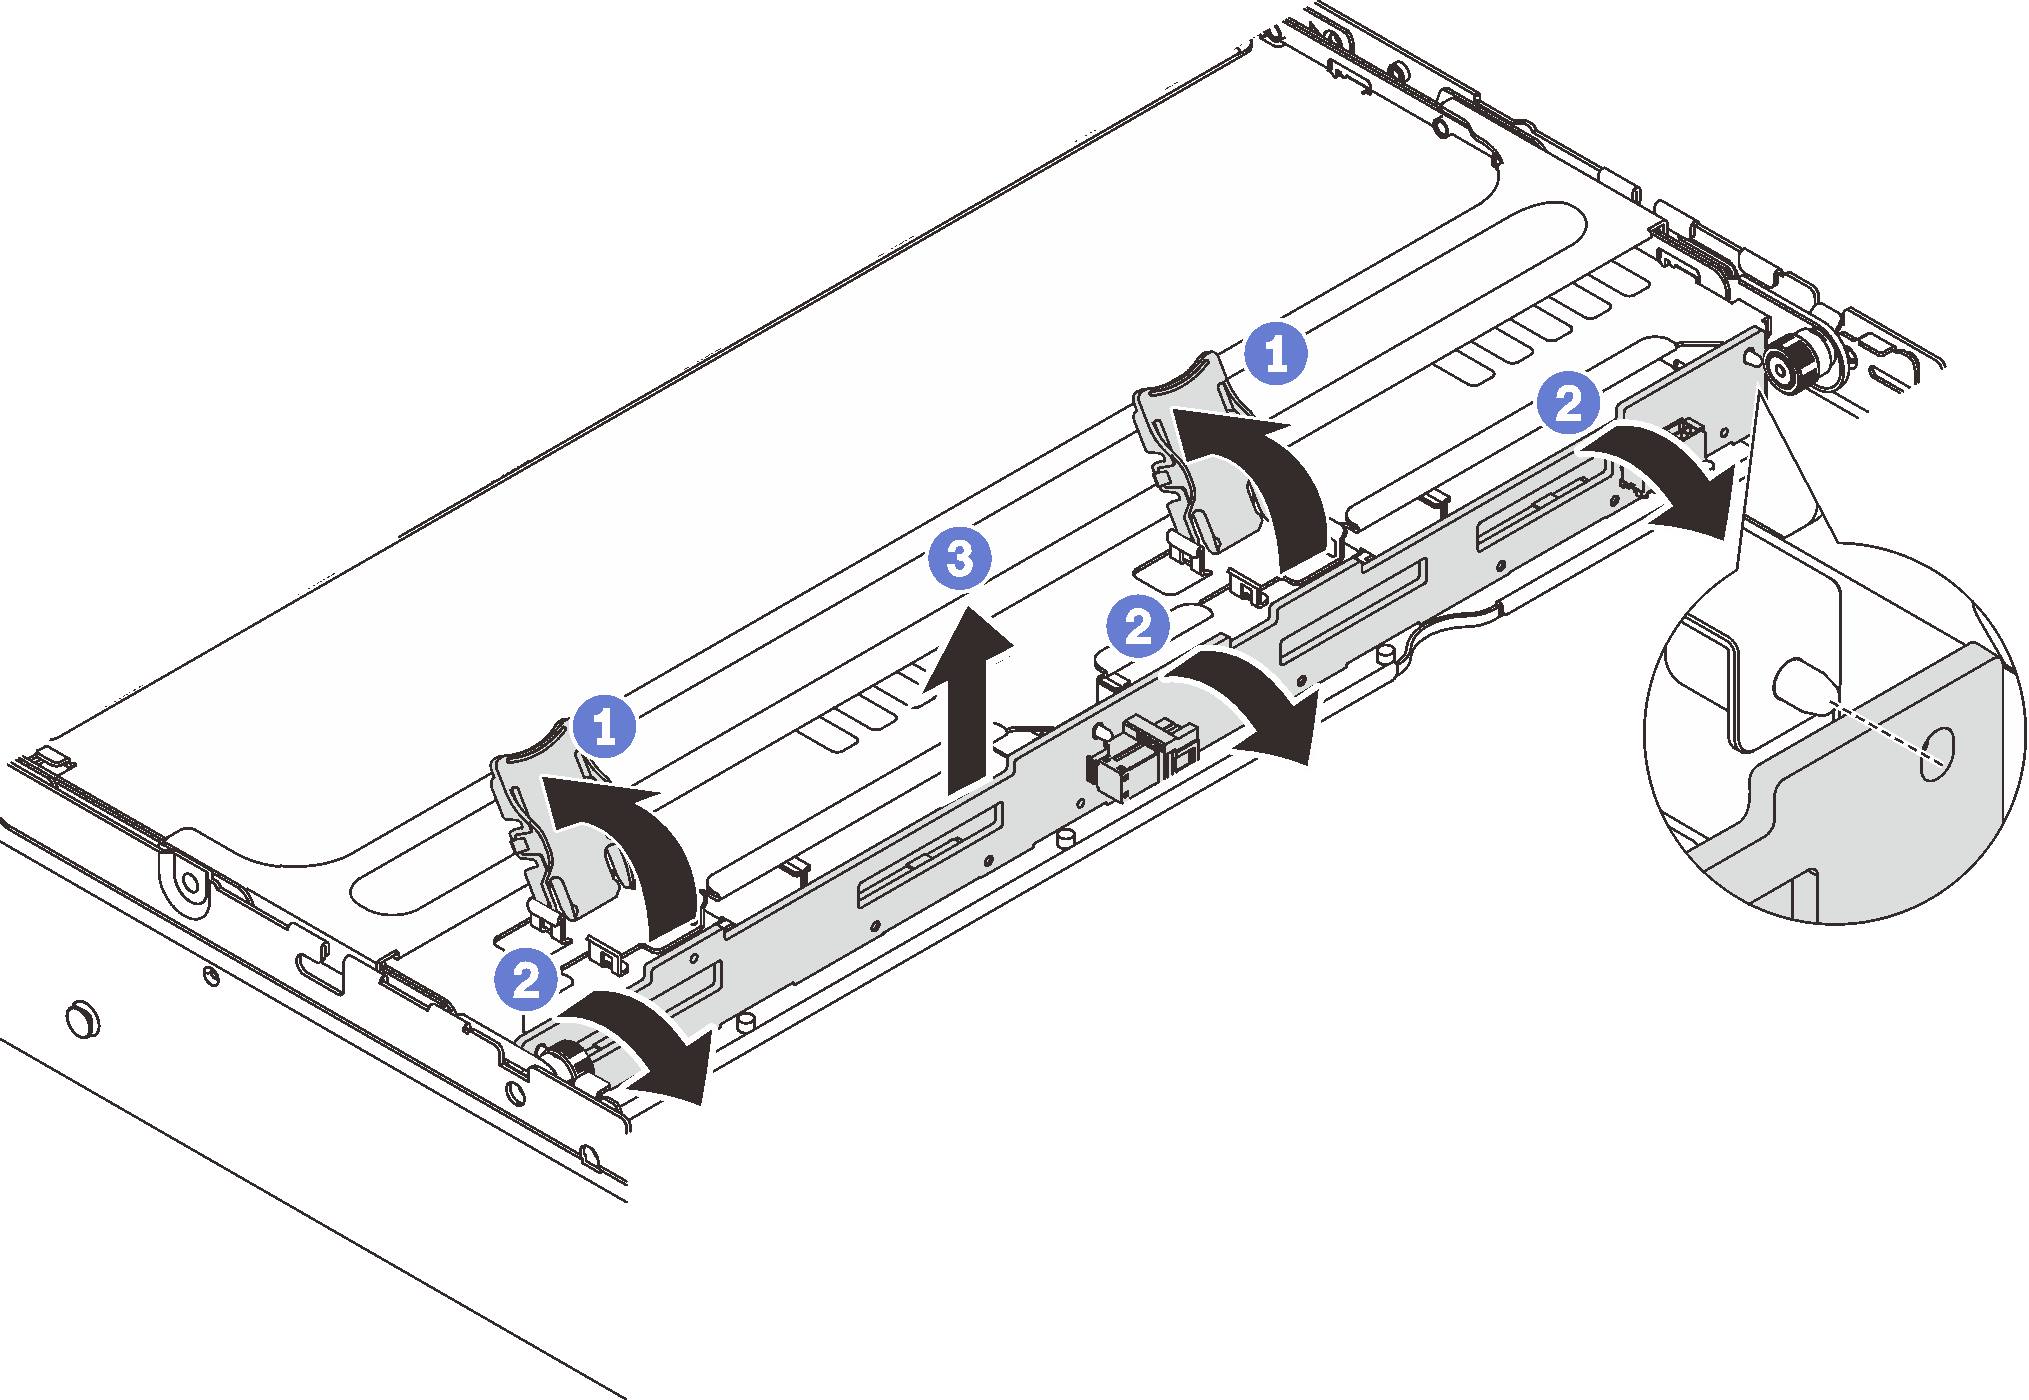 Removing the middle 3.5-inch drive backplane